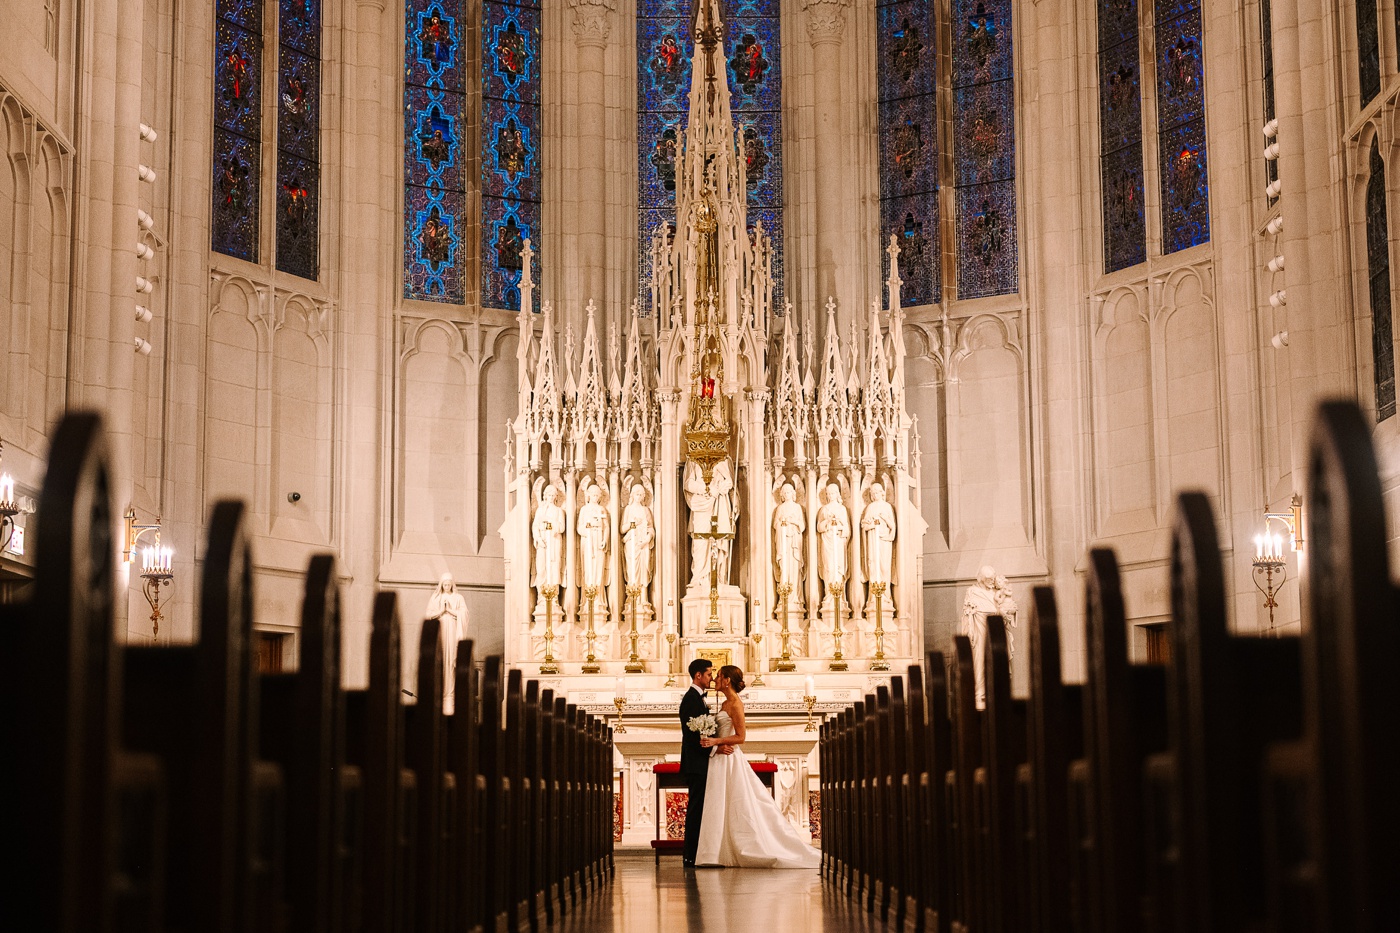 Bridal portraits at St. James Chapel in Chicago, IL